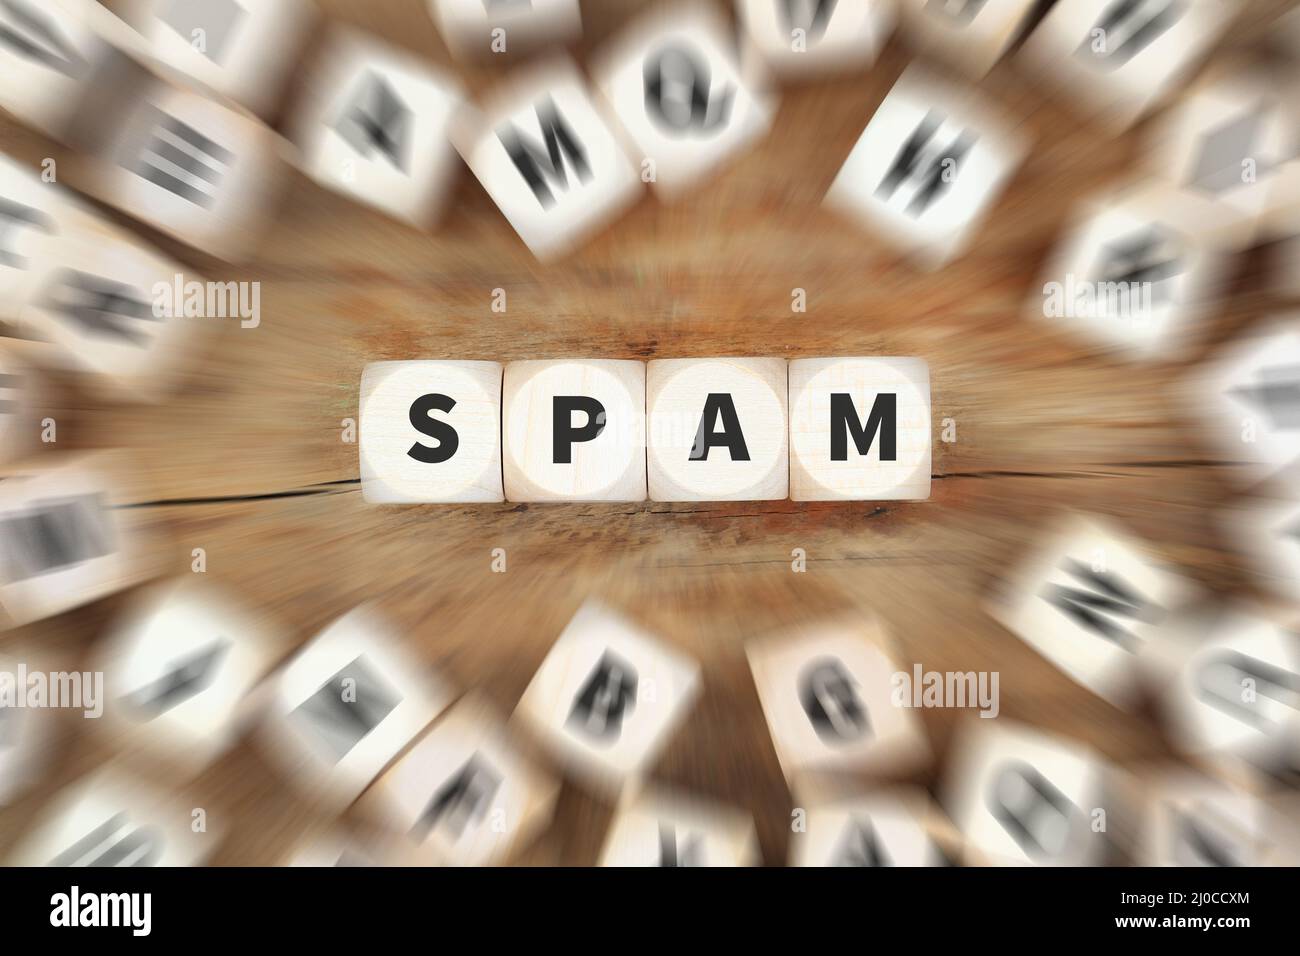 Spam Mail Letter Spam Mail Cube Business Concept Stock Photo